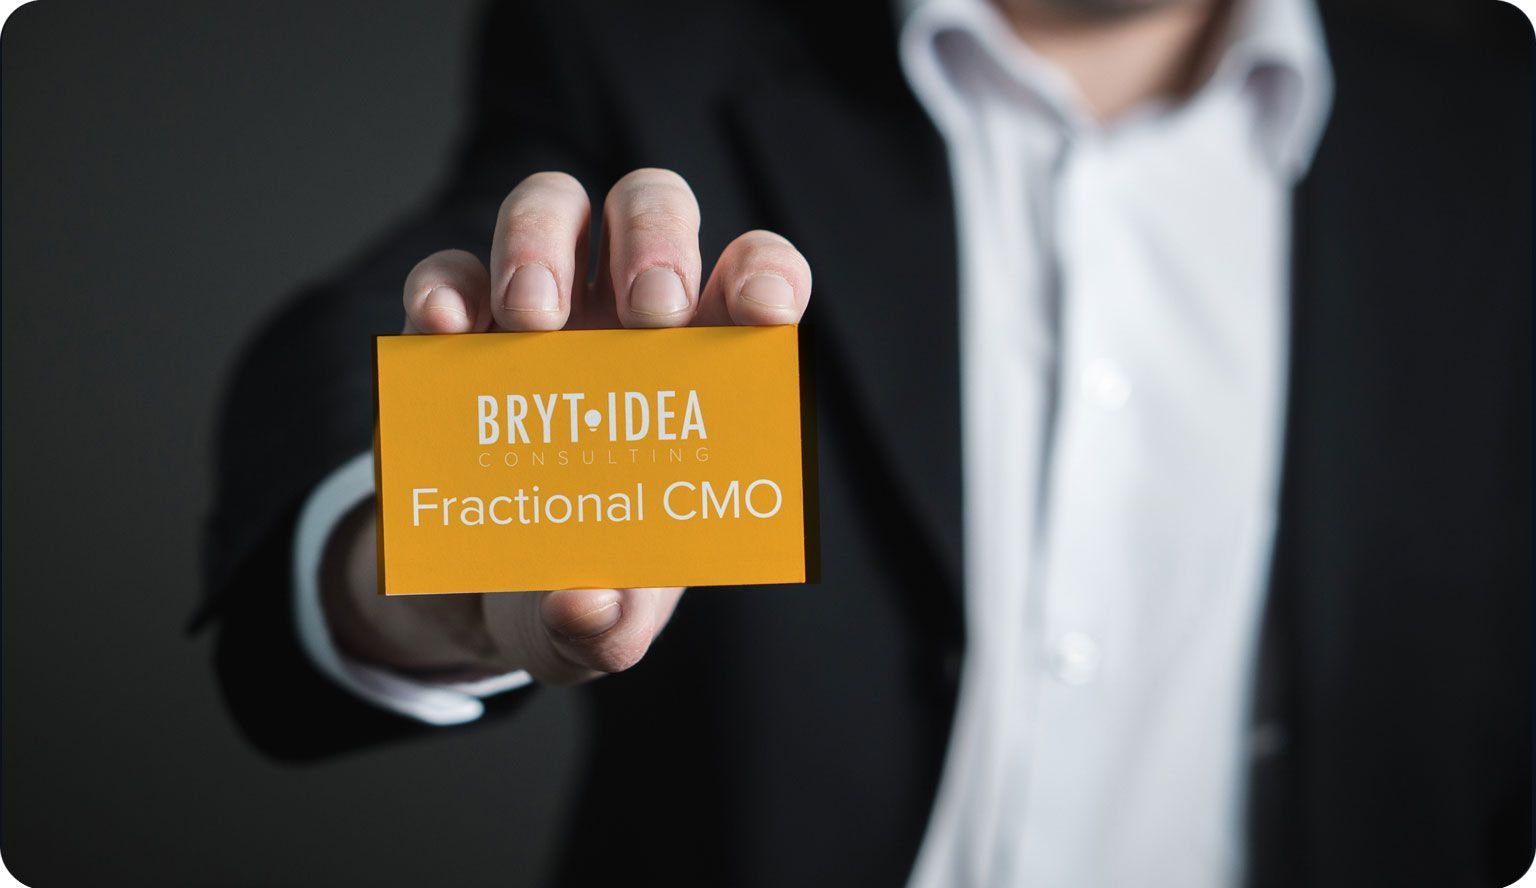 a man in a suit is holding a business card that says bryt idea consulting fractional cmo